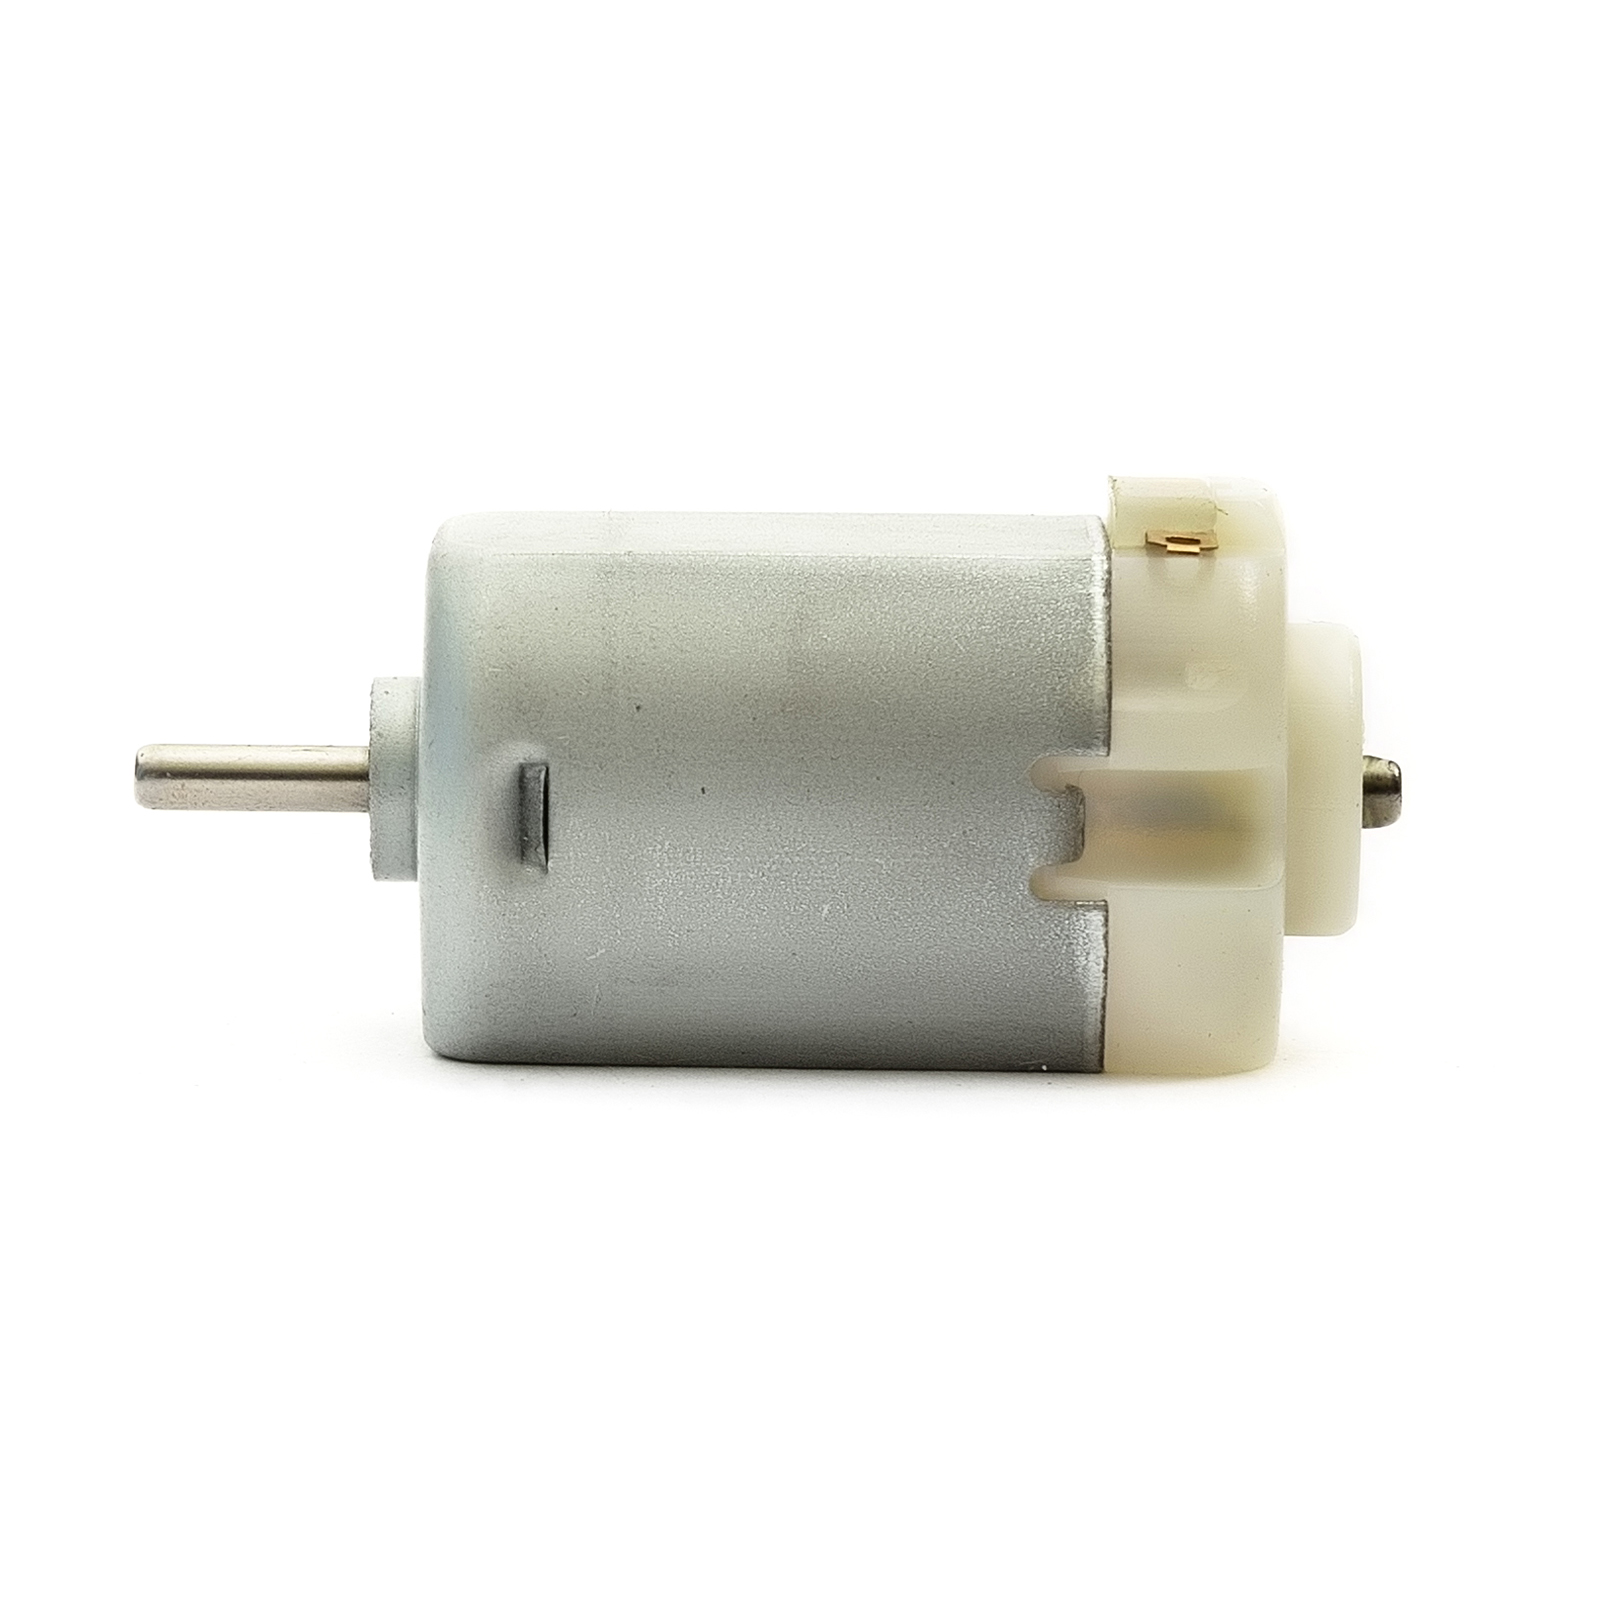 Mabuchi Round Type DC Hobby Craft RC Motor Re-140 1x 1.95mm X 8mm Shaft new for sale online 